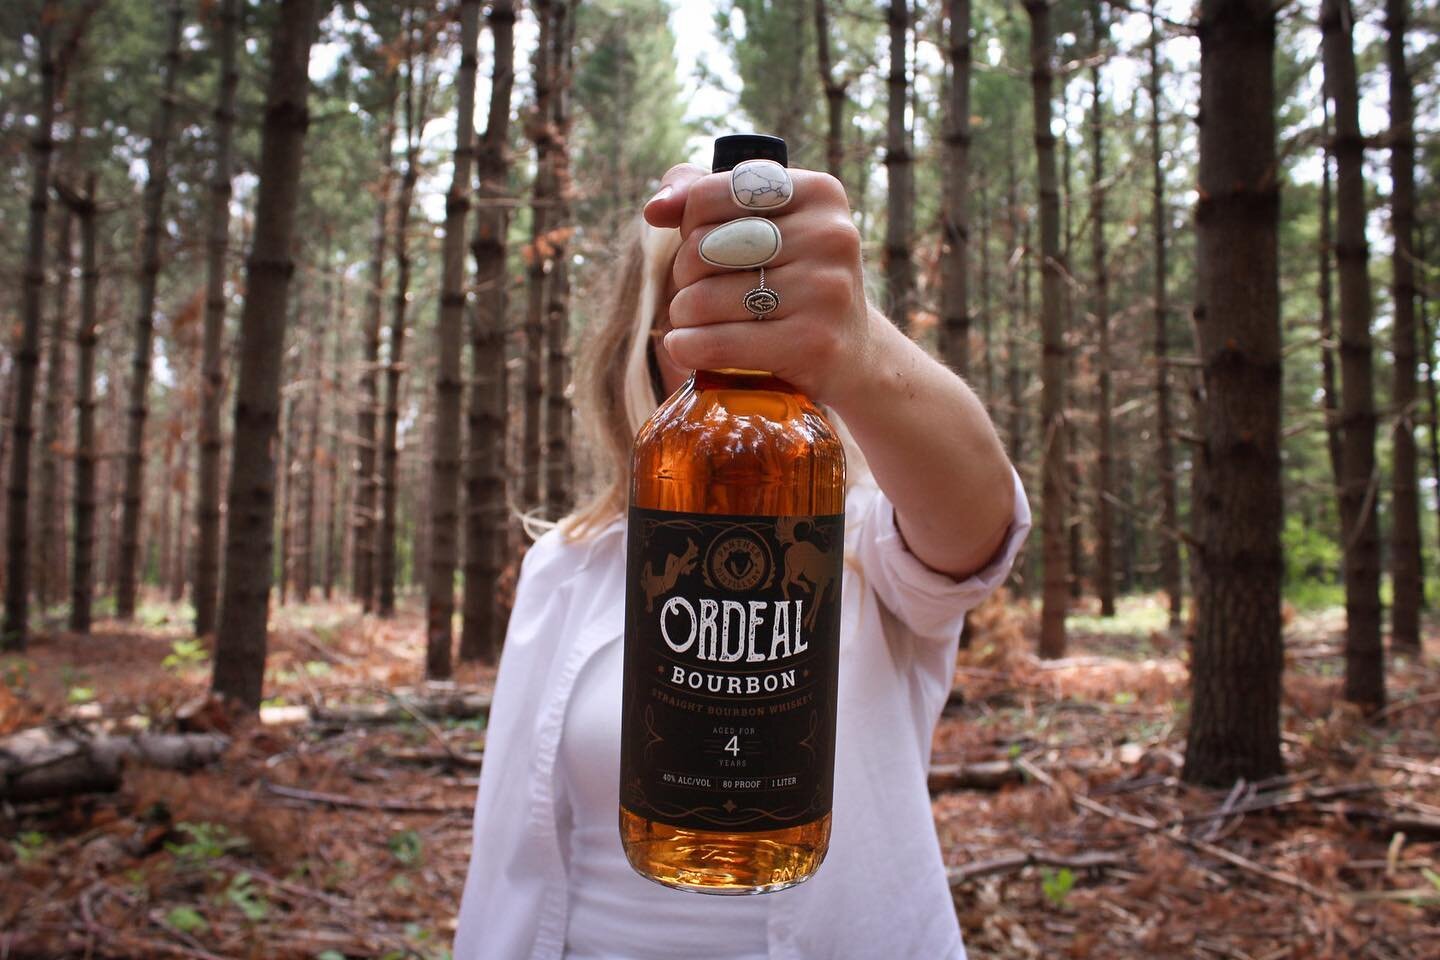 ⁣
⁣
Wherever your next adventure takes you, we have no problem coming along for the ride! 🥃✌🏻🌲⁣
⁣
⁣
Where are you headed off to next? 🛣⁣
⁣
⁣
&bull;⁣
&bull;⁣
&bull;⁣
&bull;⁣
#whiskey #whiskeylife #whiskeygram #whiskeybusiness #liquor #spirits #loc